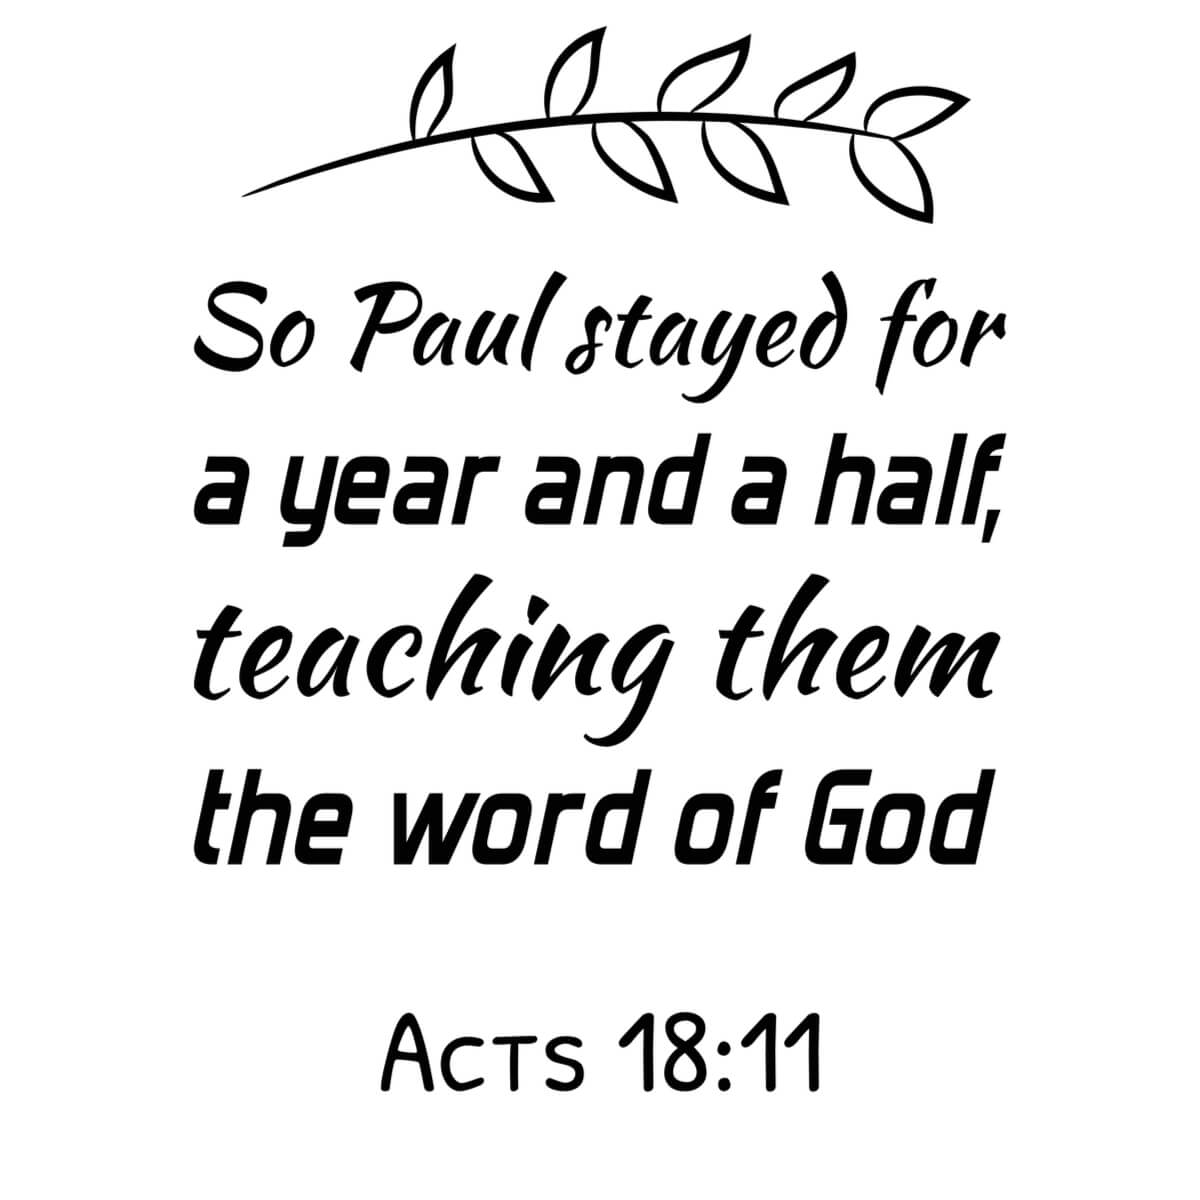 So Paul stayed for a year and a half, teaching them the word of God.